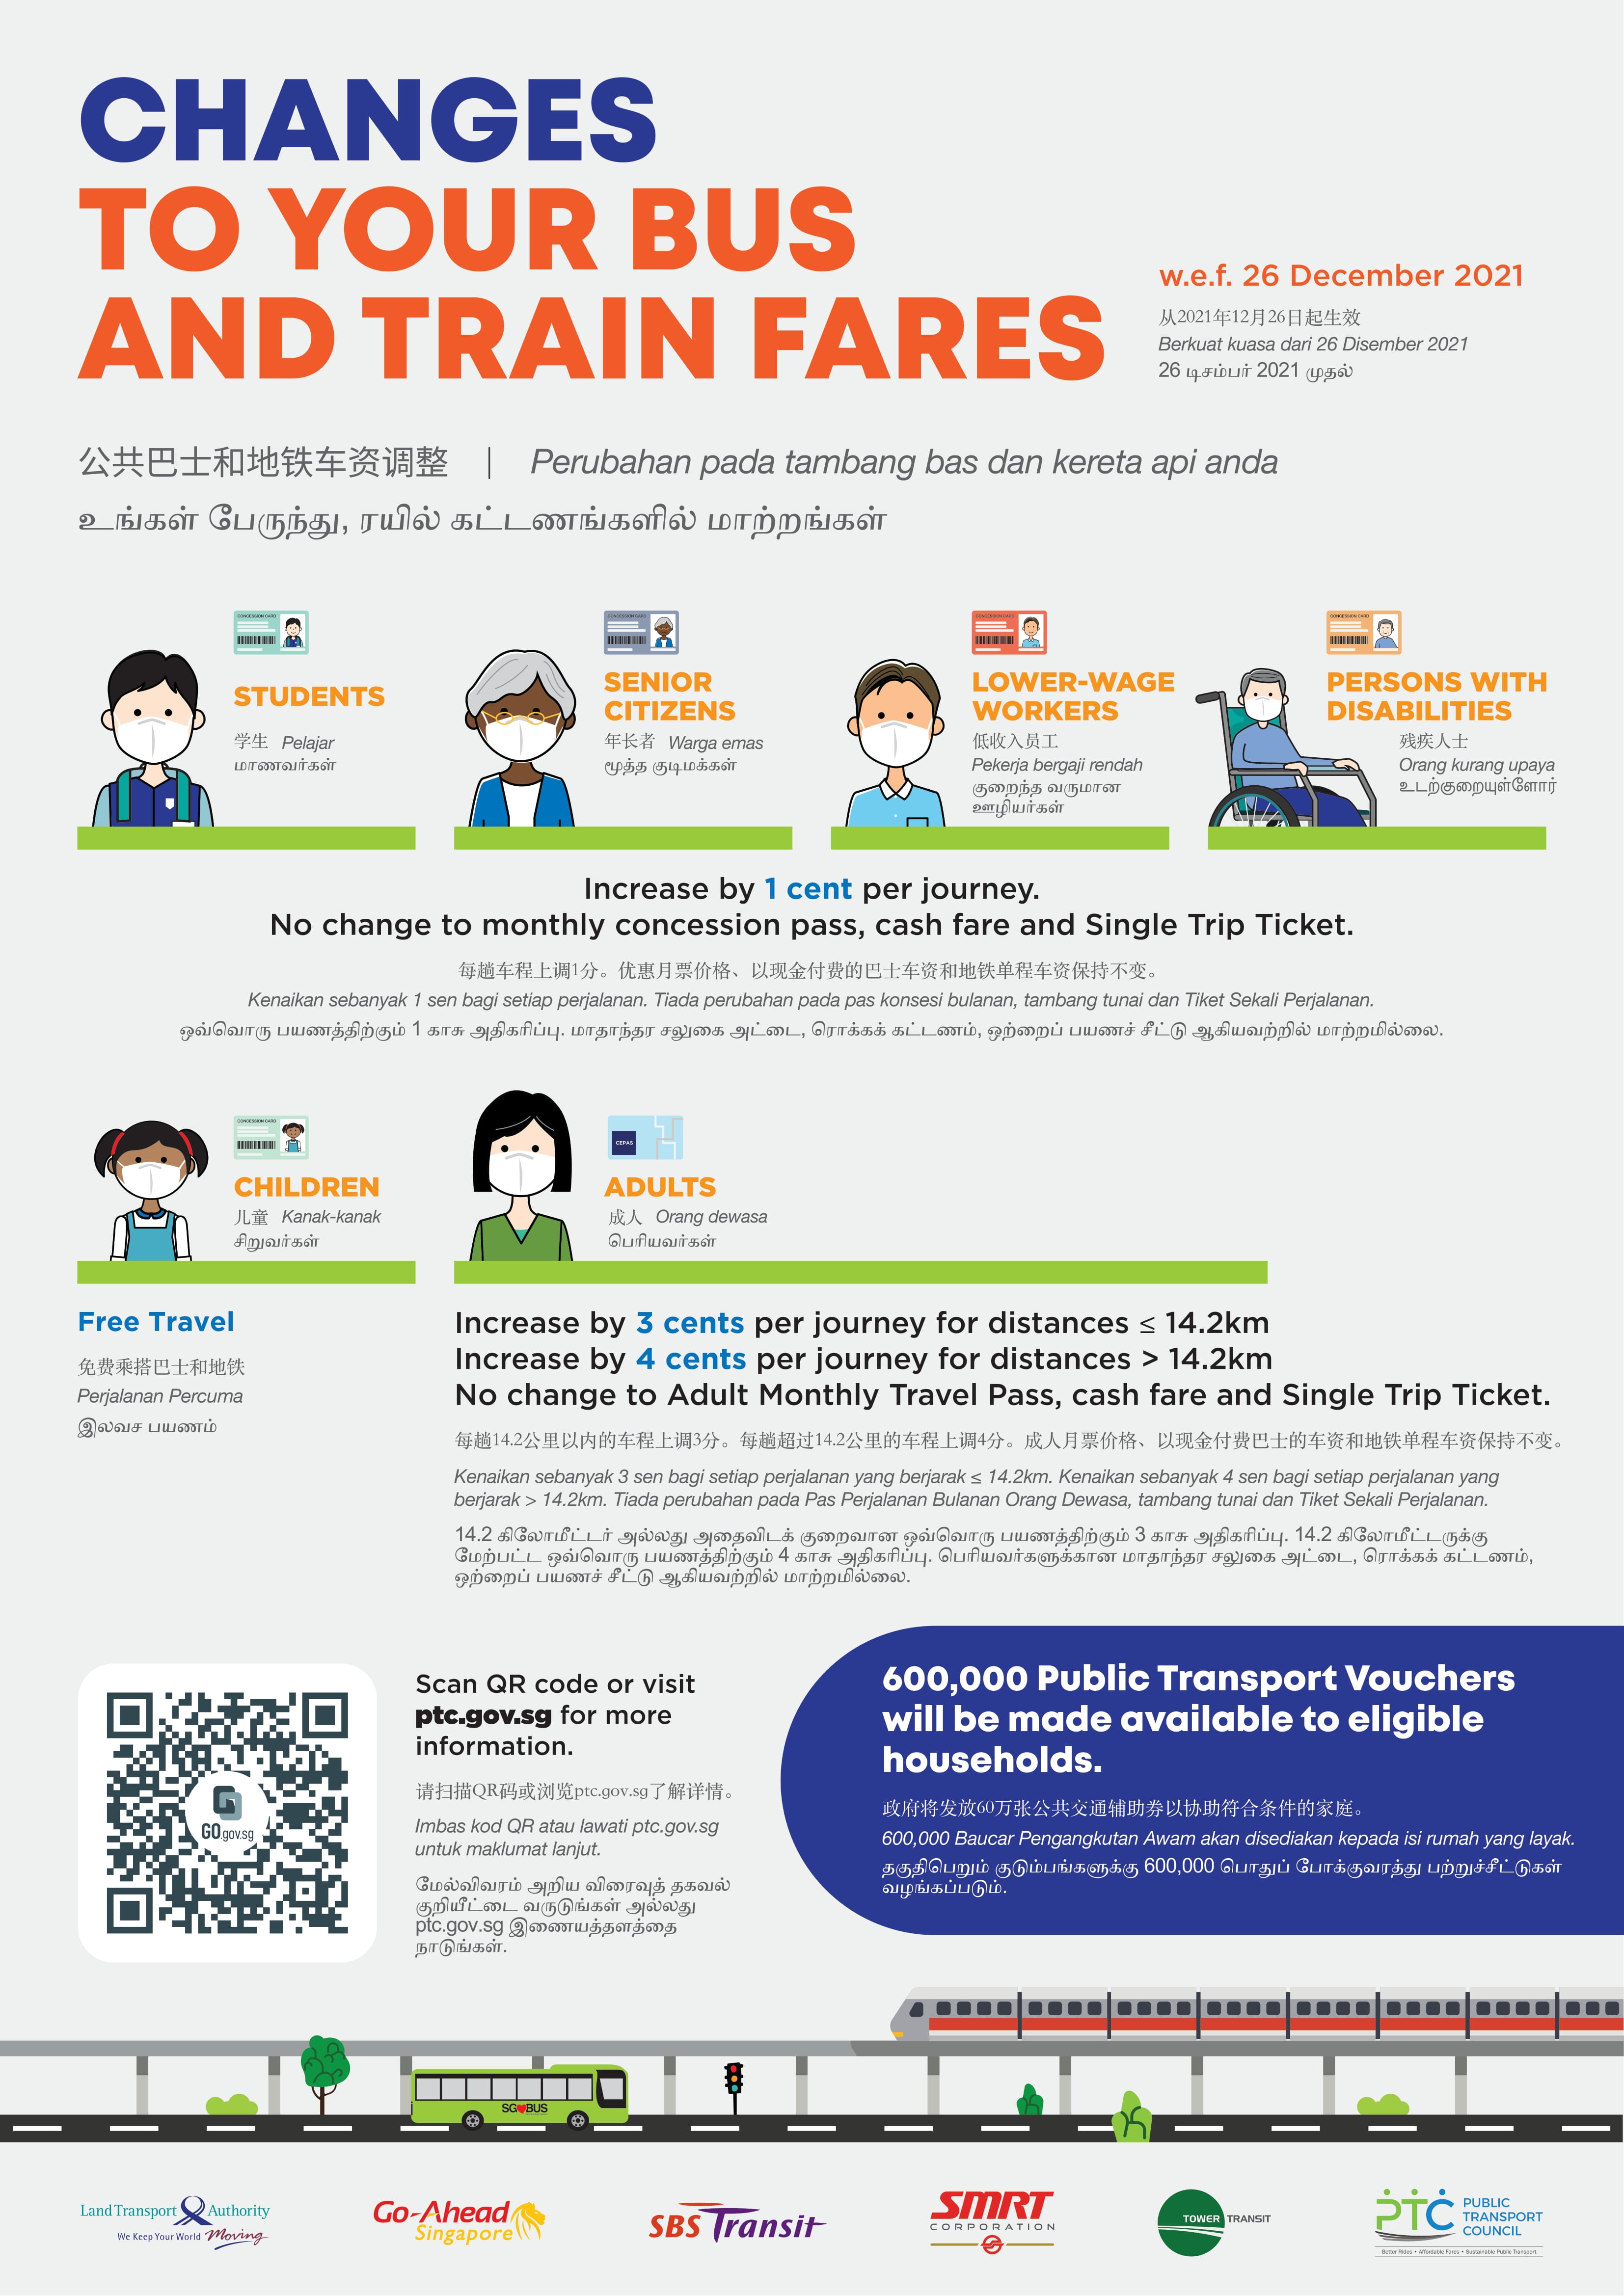 Changes To Your Bus And Train Fares w.e.f. 26 December 2021